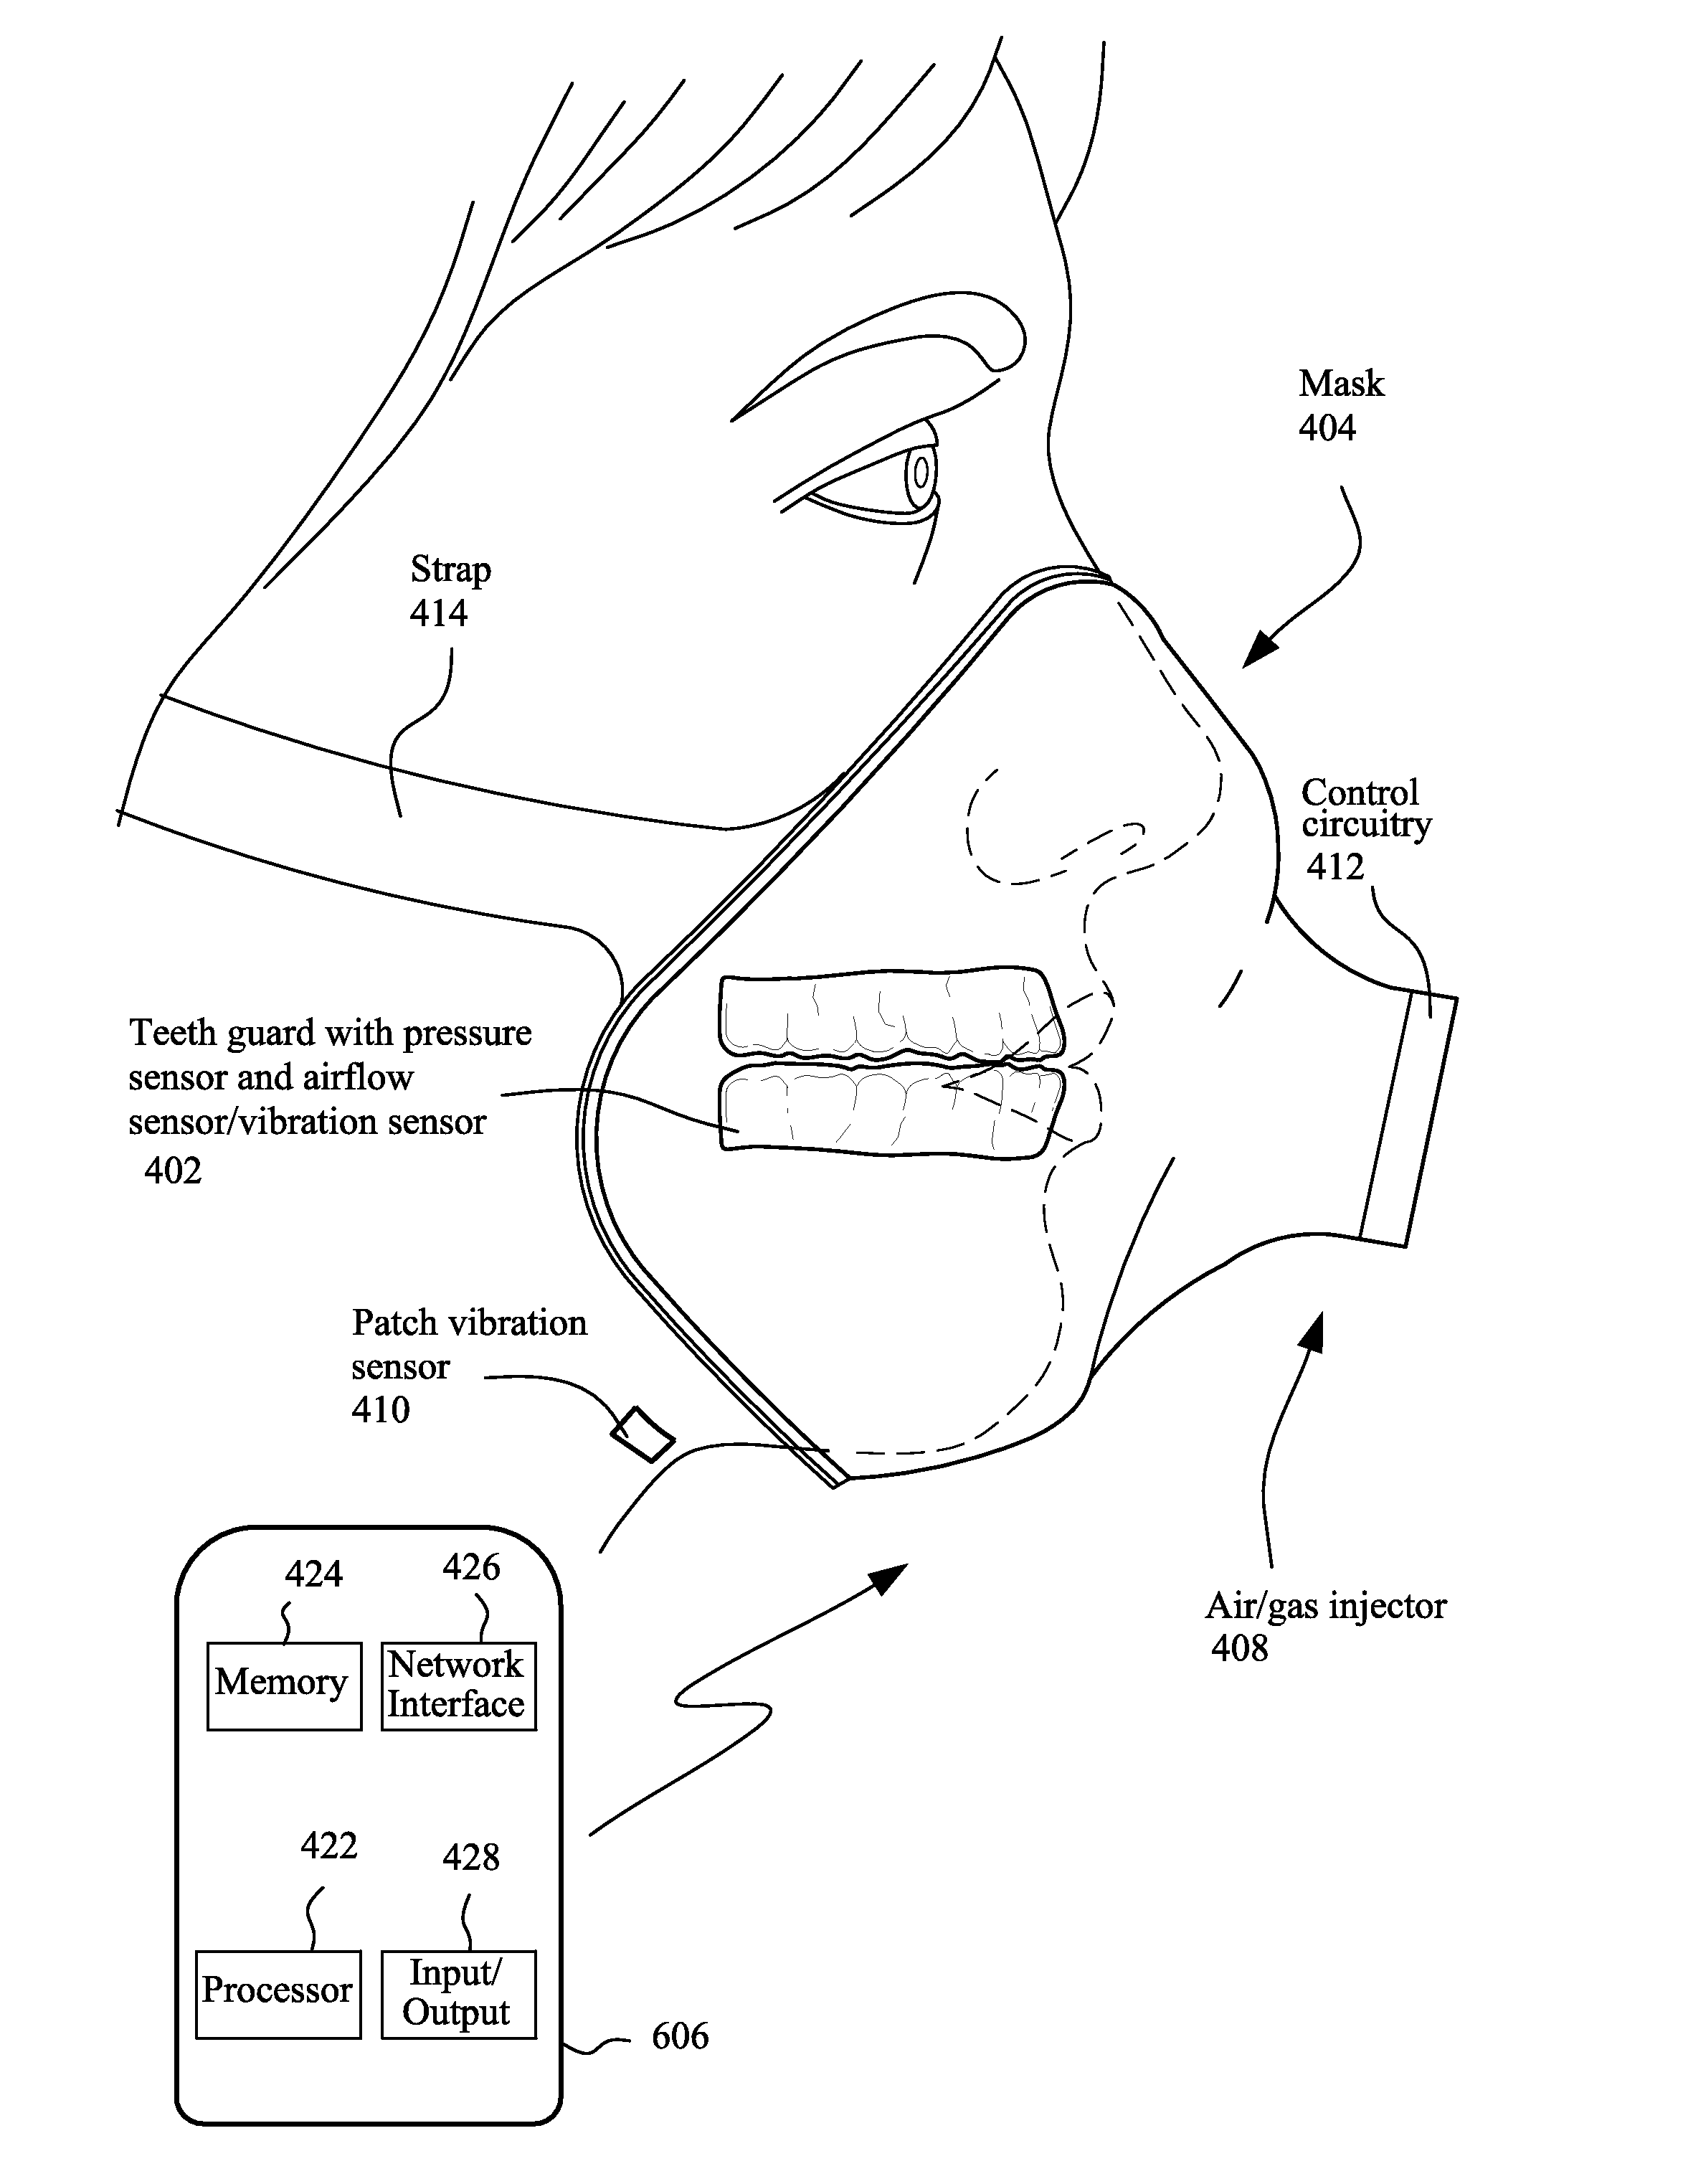 Methods and devices for monitoring bruxism and/or sleep apnea and alleviating associated conditions